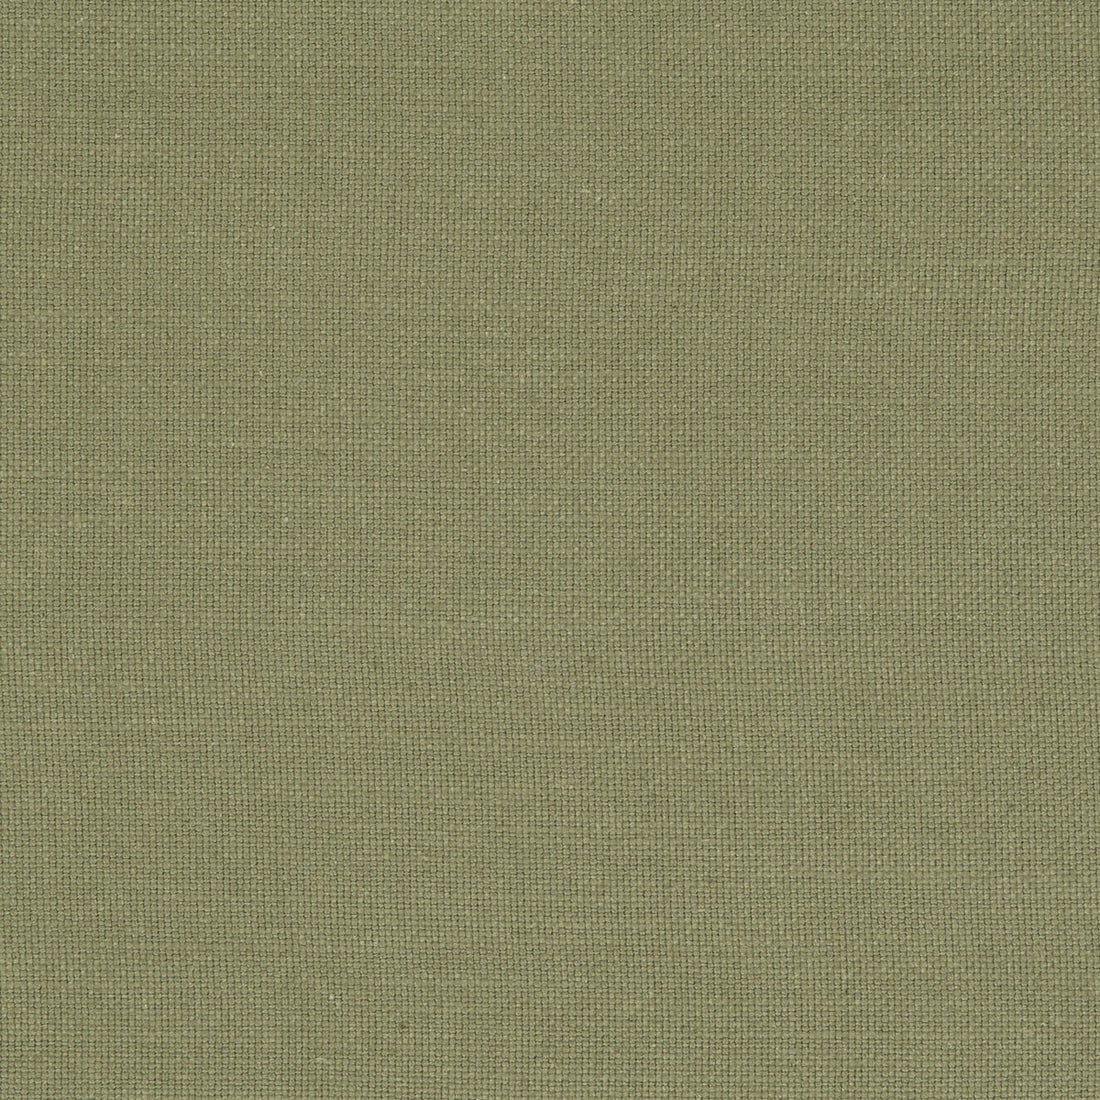 Nantucket fabric in olive color - pattern F0594/35.CAC.0 - by Clarke And Clarke in the Clarke &amp; Clarke Nantucket collection